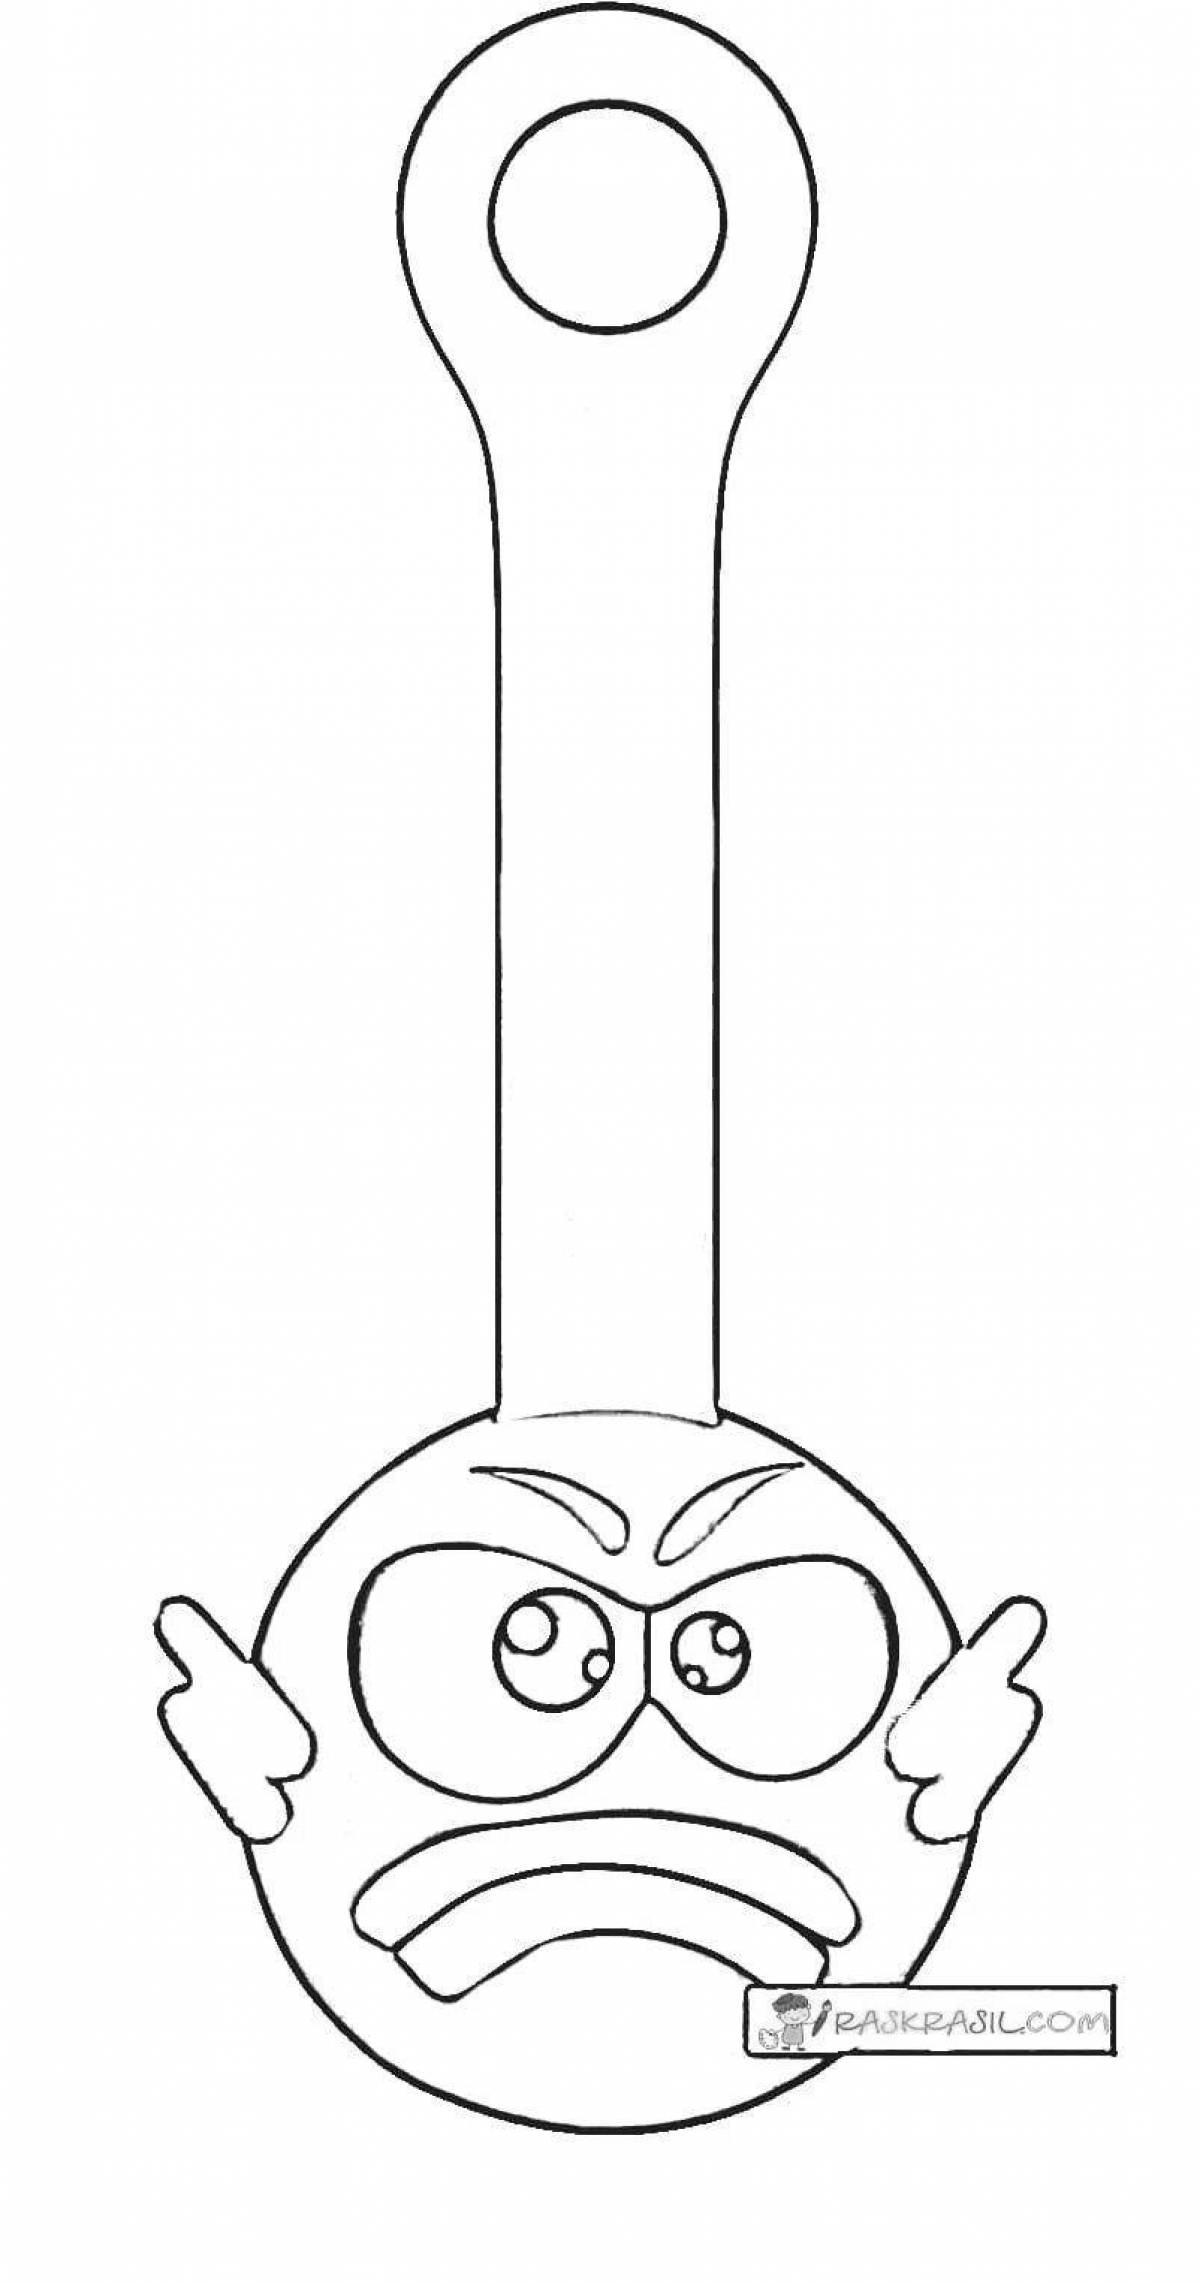 Coloring page of funny fasteners